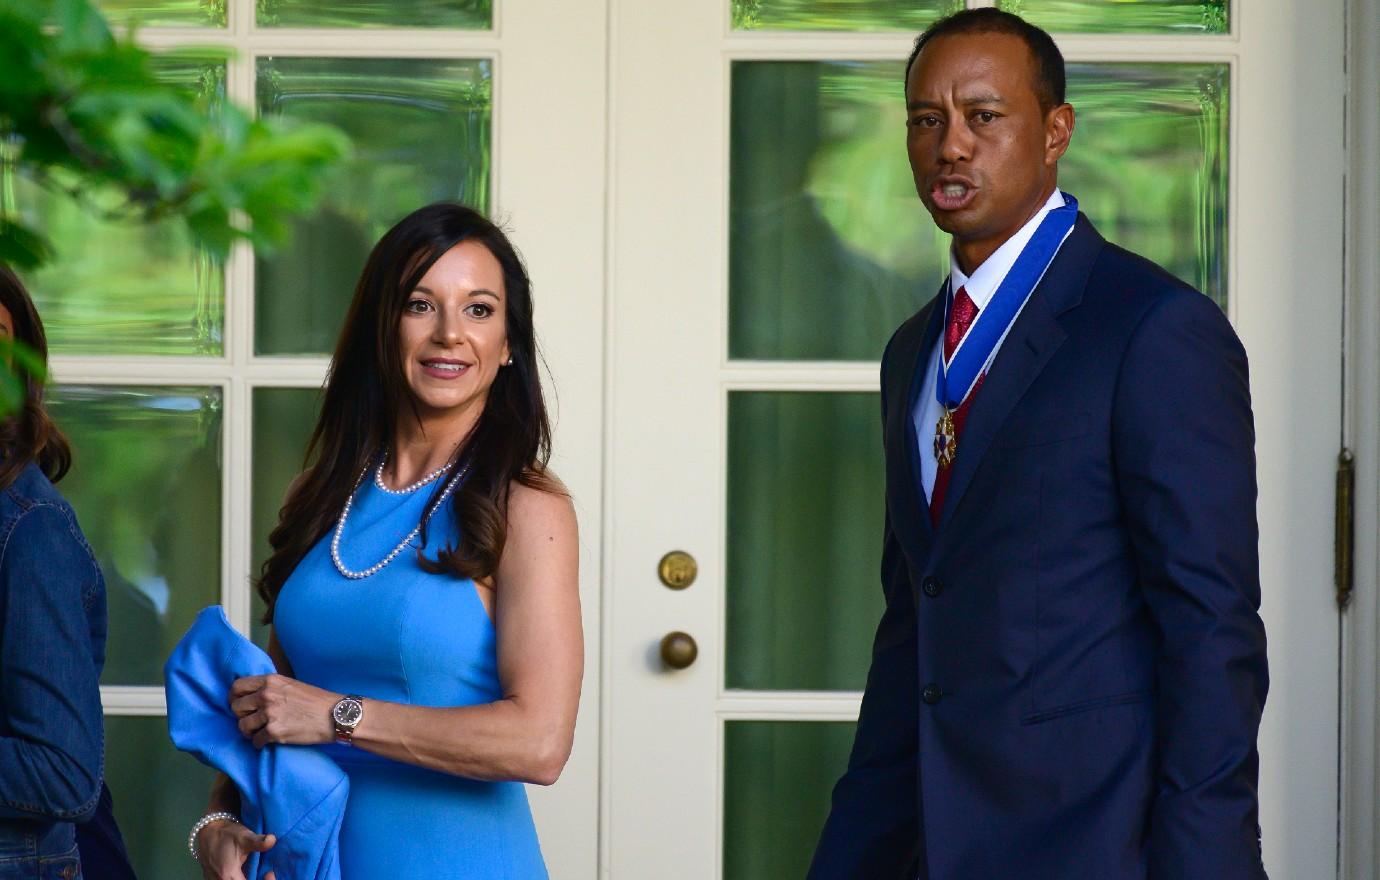 Tiger Woods Tricked Erica Herman Into Being Locked Out Of Her Home pic